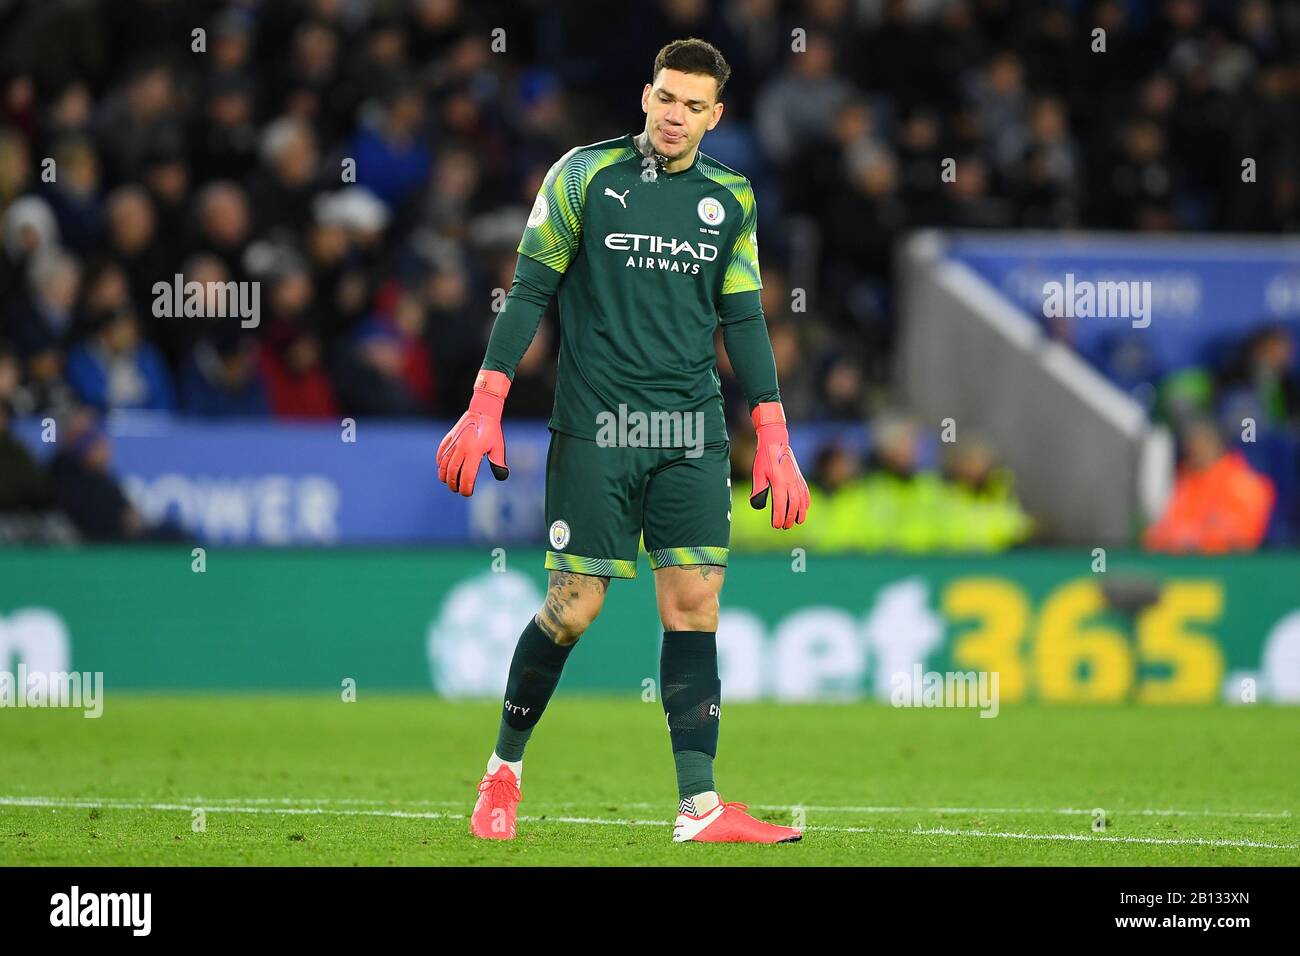 Leicester, UK. 22nd Feb, 2020.  Ederson (31) of Manchester City during the Premier League match between Leicester City and Manchester City at the King Power Stadium, Leicester on Saturday 22nd February 2020. (Credit: Jon Hobley | MI News) Photograph may only be used for newspaper and/or magazine editorial purposes, license required for commercial use Credit: MI News & Sport /Alamy Live News Stock Photo